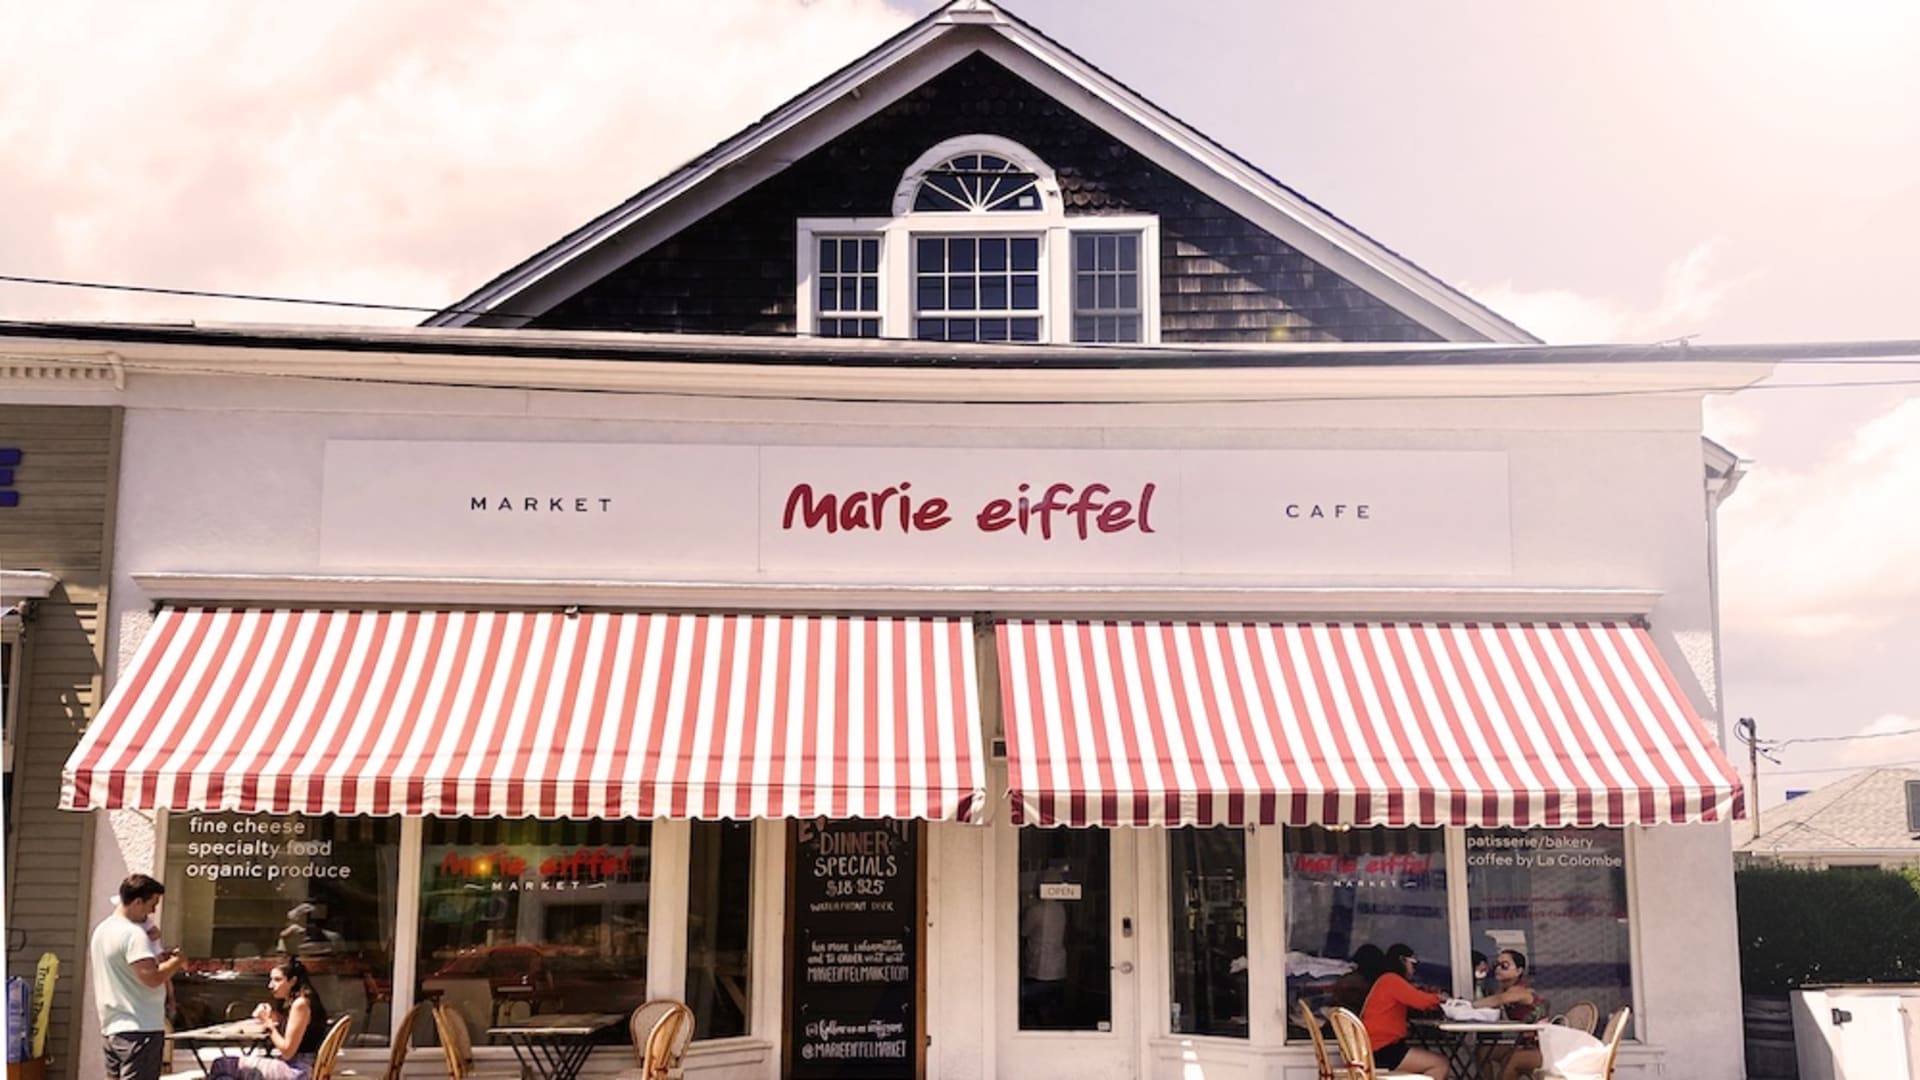 The Shelter Island, New York store.